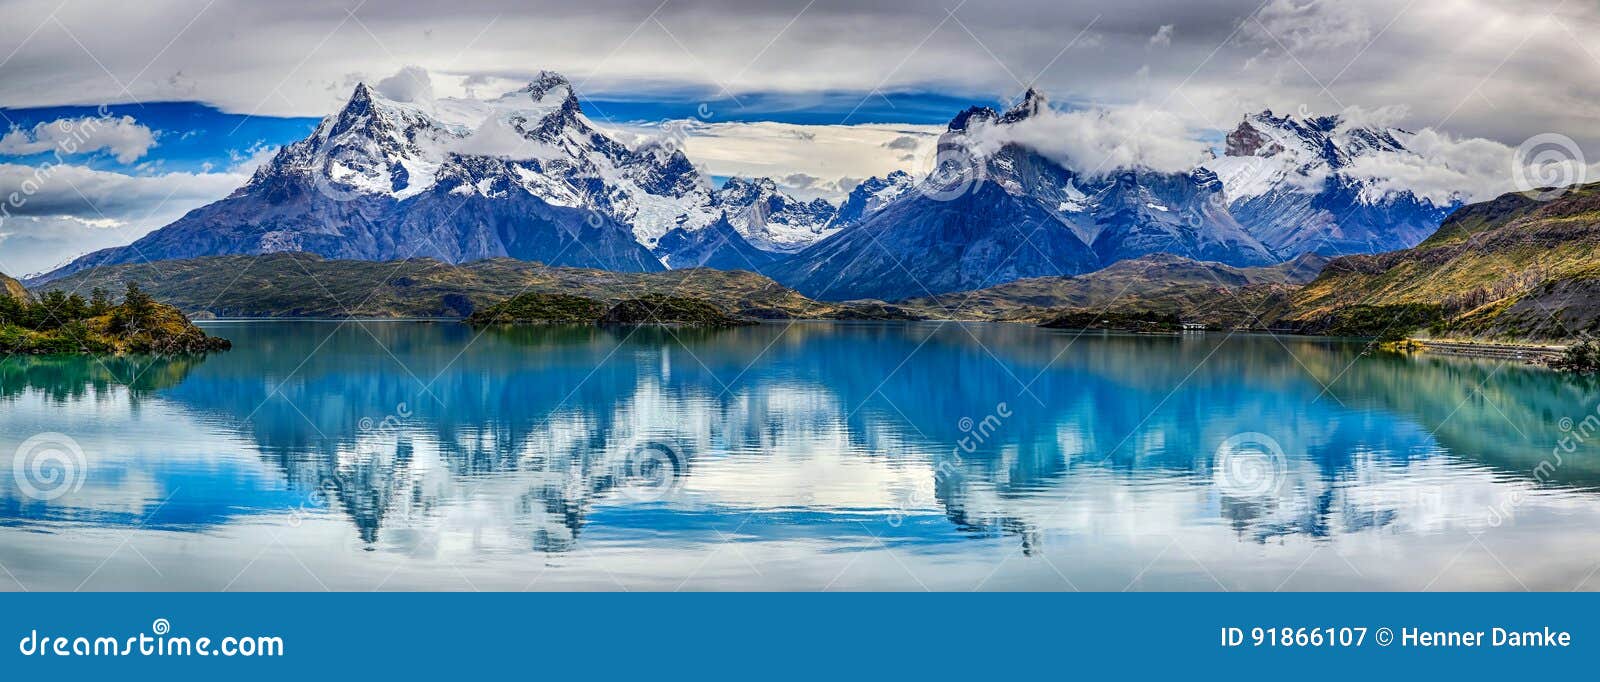 reflection of cuernos del paine at lake pehoe - torres del paine n.p. chile